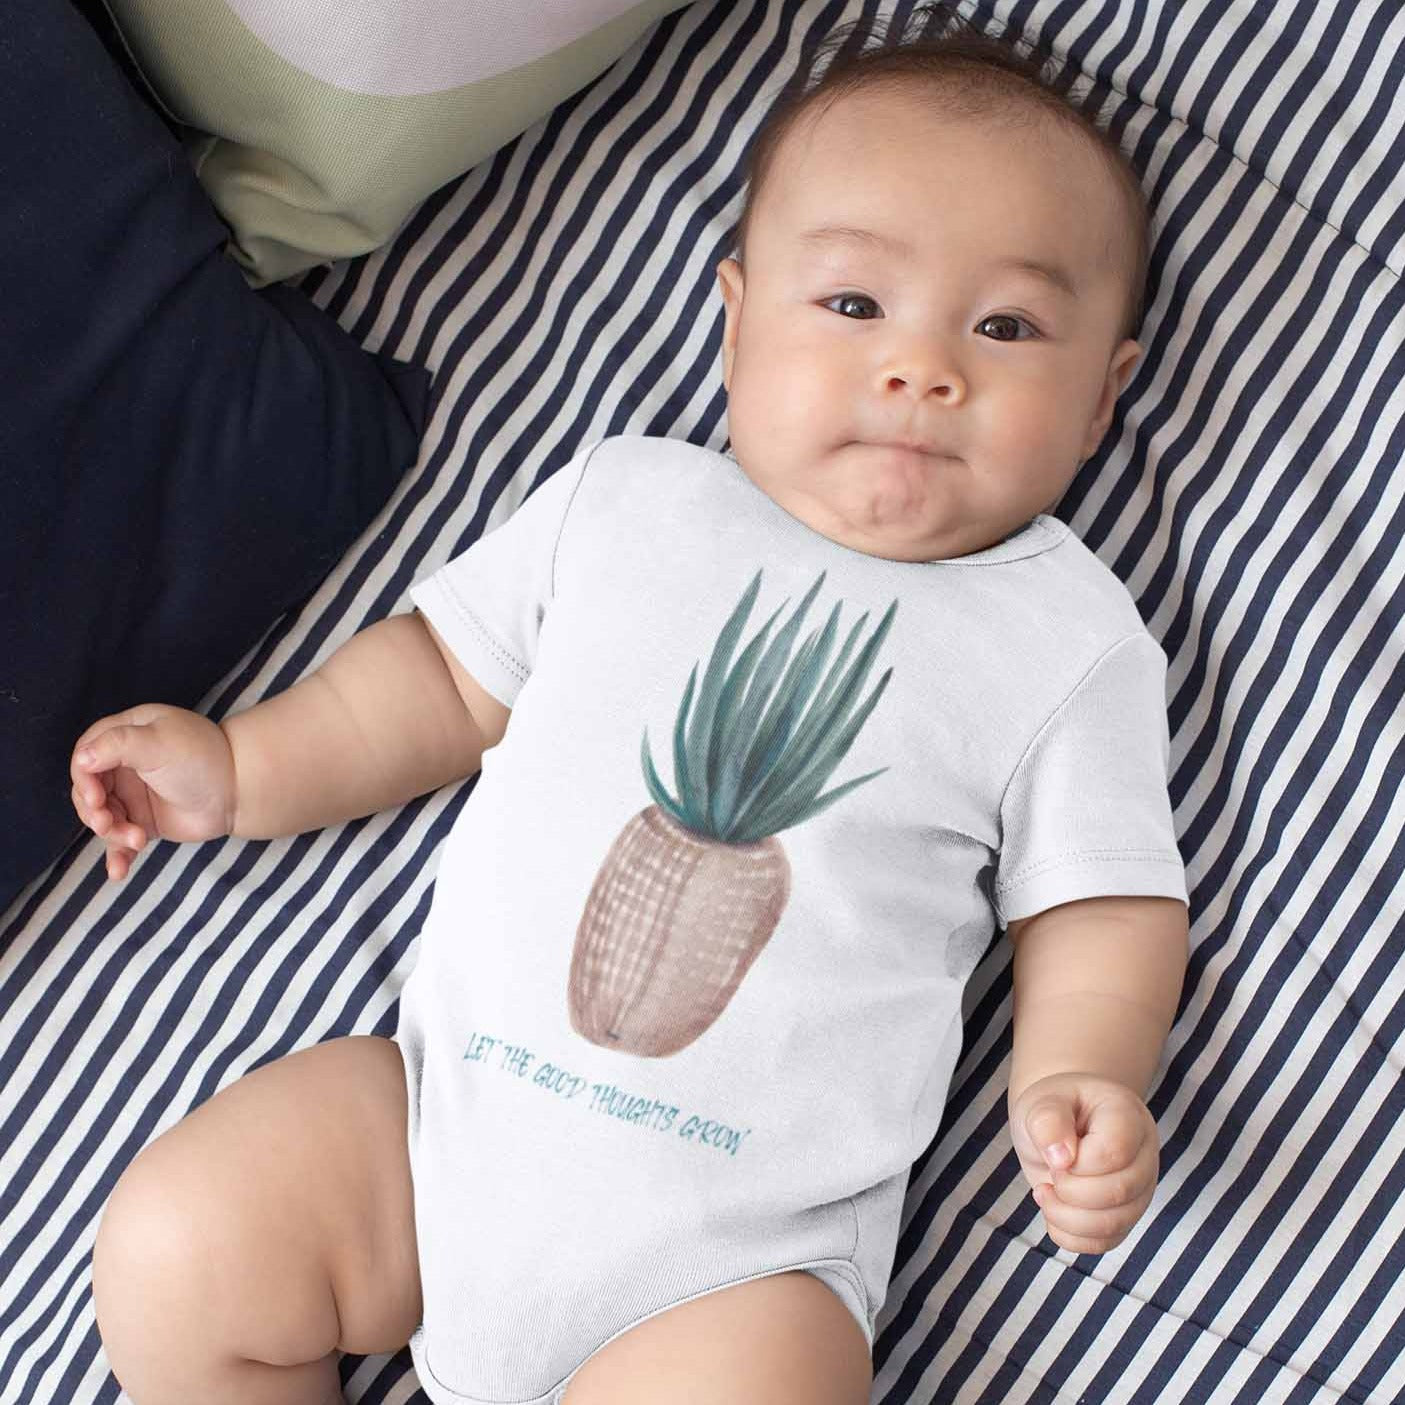 Let The Good Thoughts Grow - Baby Bodysuit Baby Bodysuit kids Plants